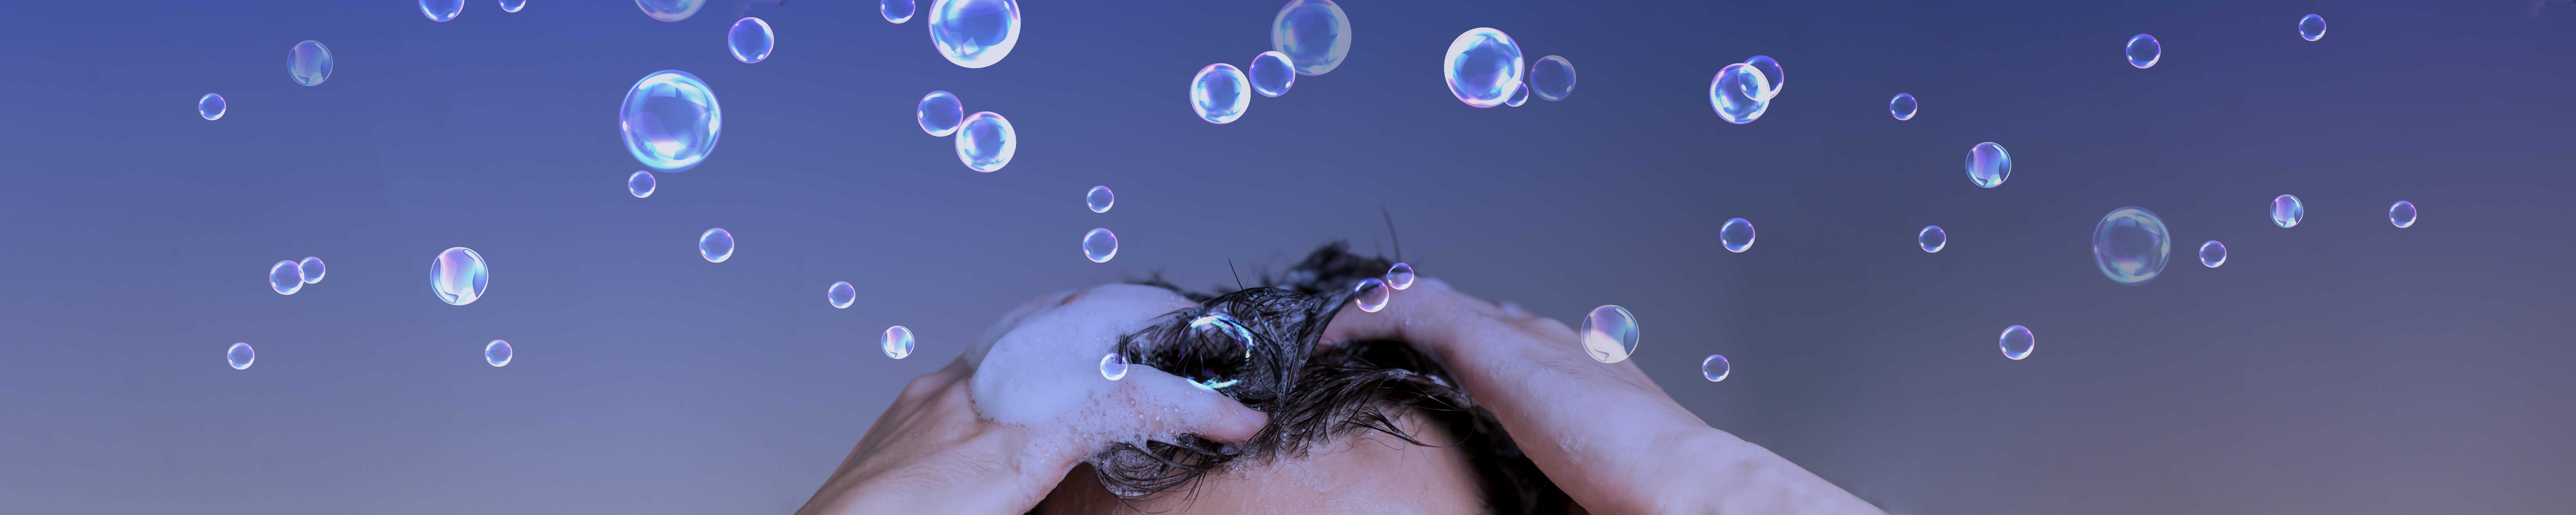 Man washing his hair with bubbles banner